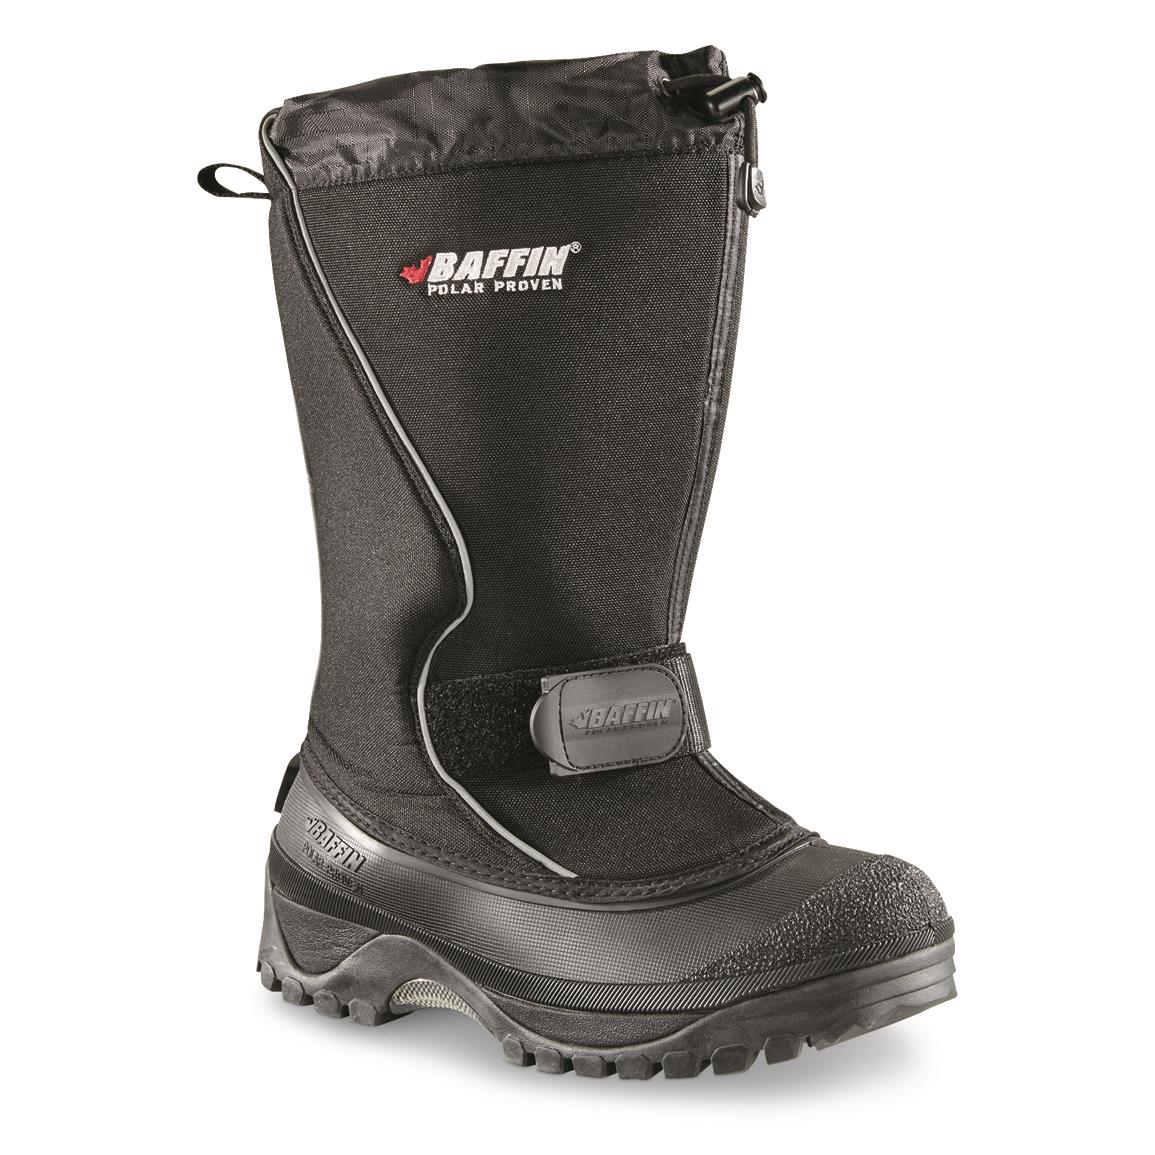 Baffin Men's Tundra Insulated Boots, Black